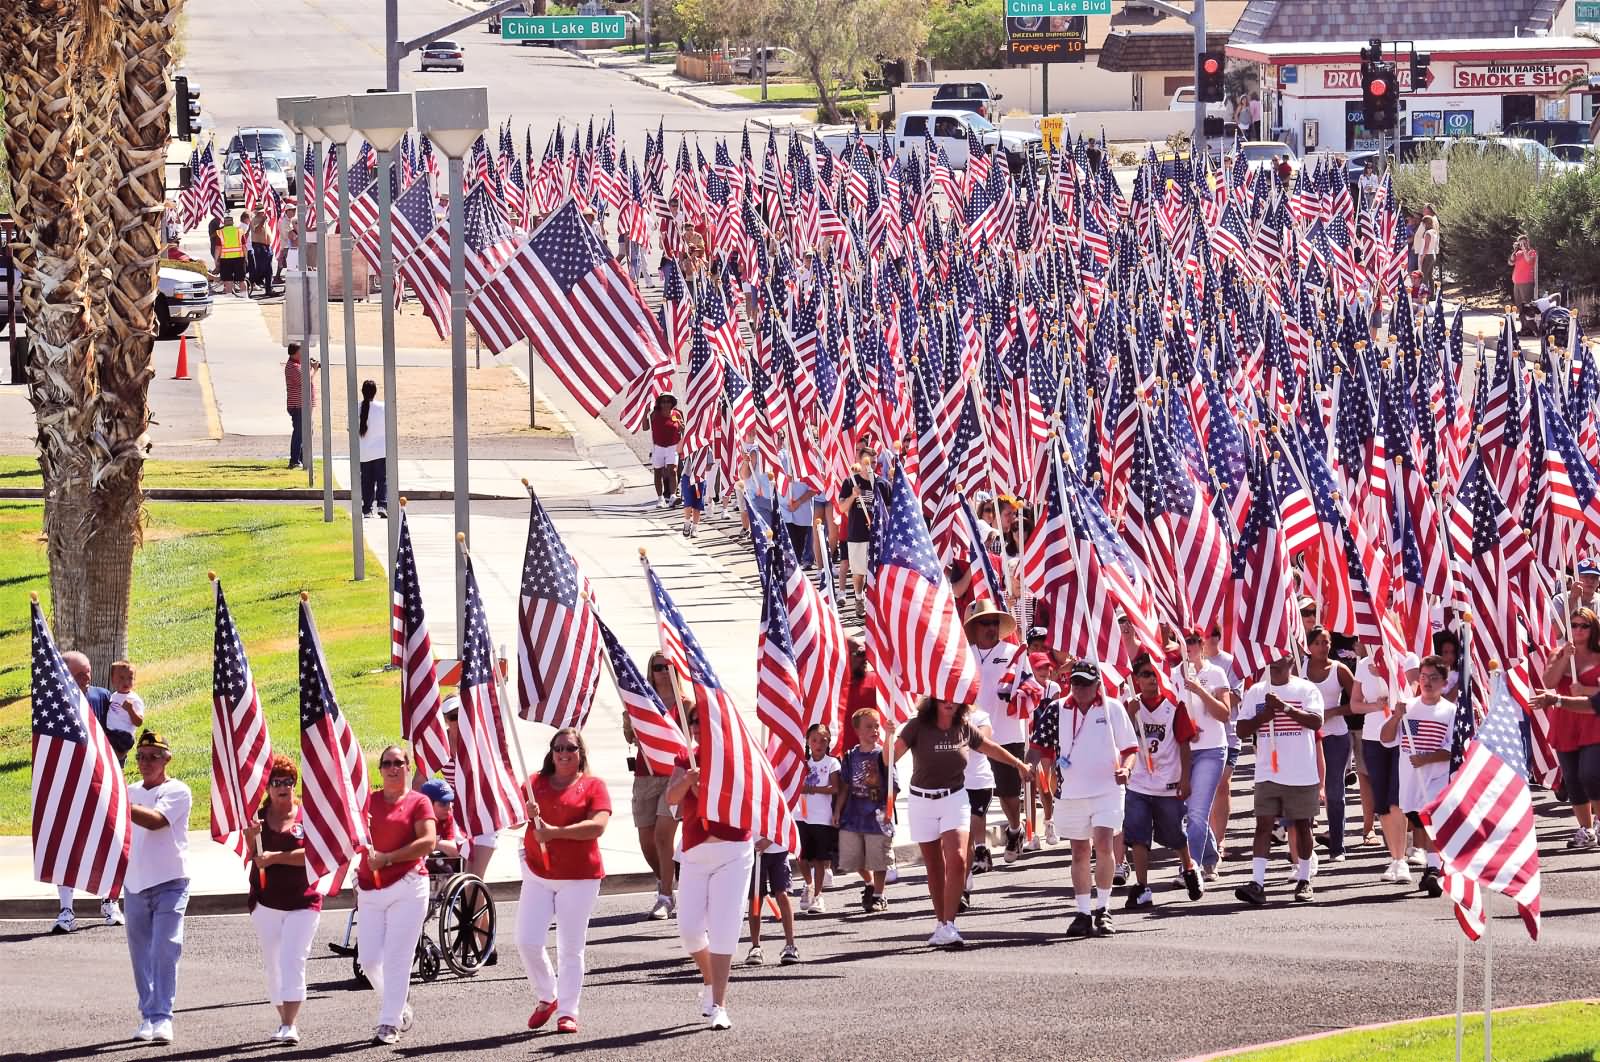 25+ Very Beautiful Flag Day Parade Pictures And Photos